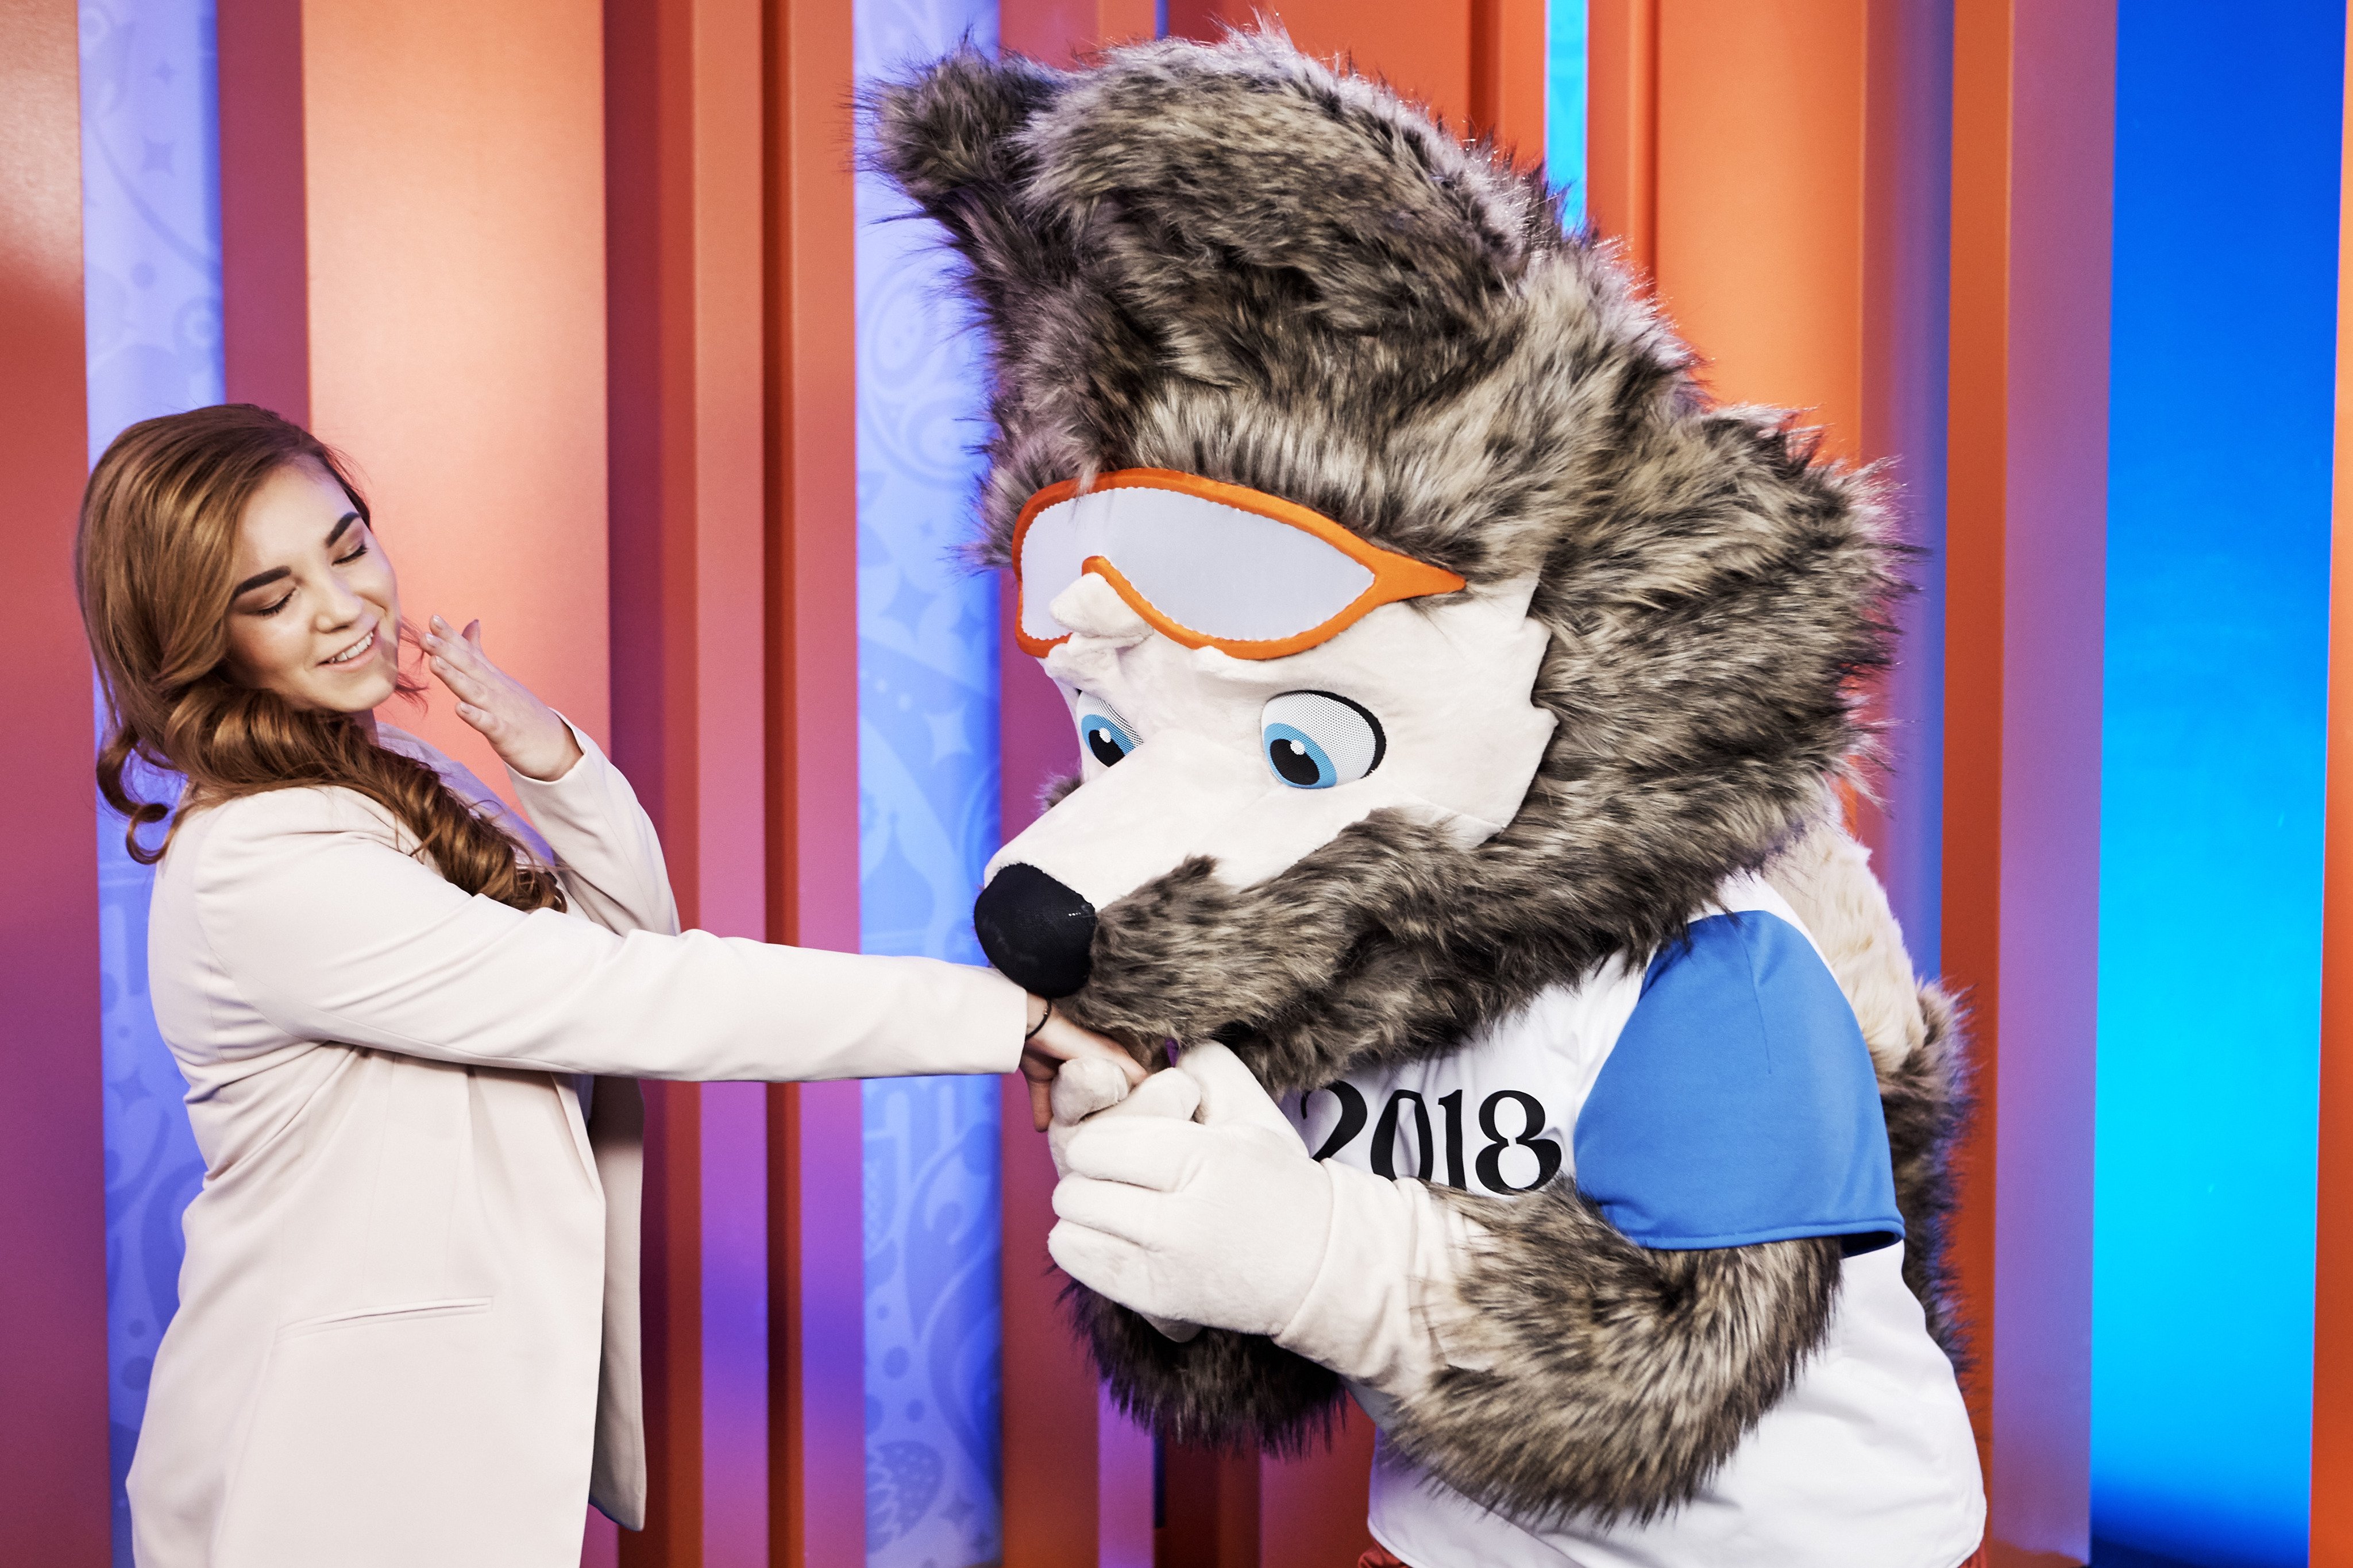 Fifa Com A Wolf Named Zabivaka Has Been Chosen As The 18 Worldcup Russia Mascot After Over 1 000 000 Votes Were Cast T Co Zuhjbmjxsq T Co Nqaemjedq2 Twitter